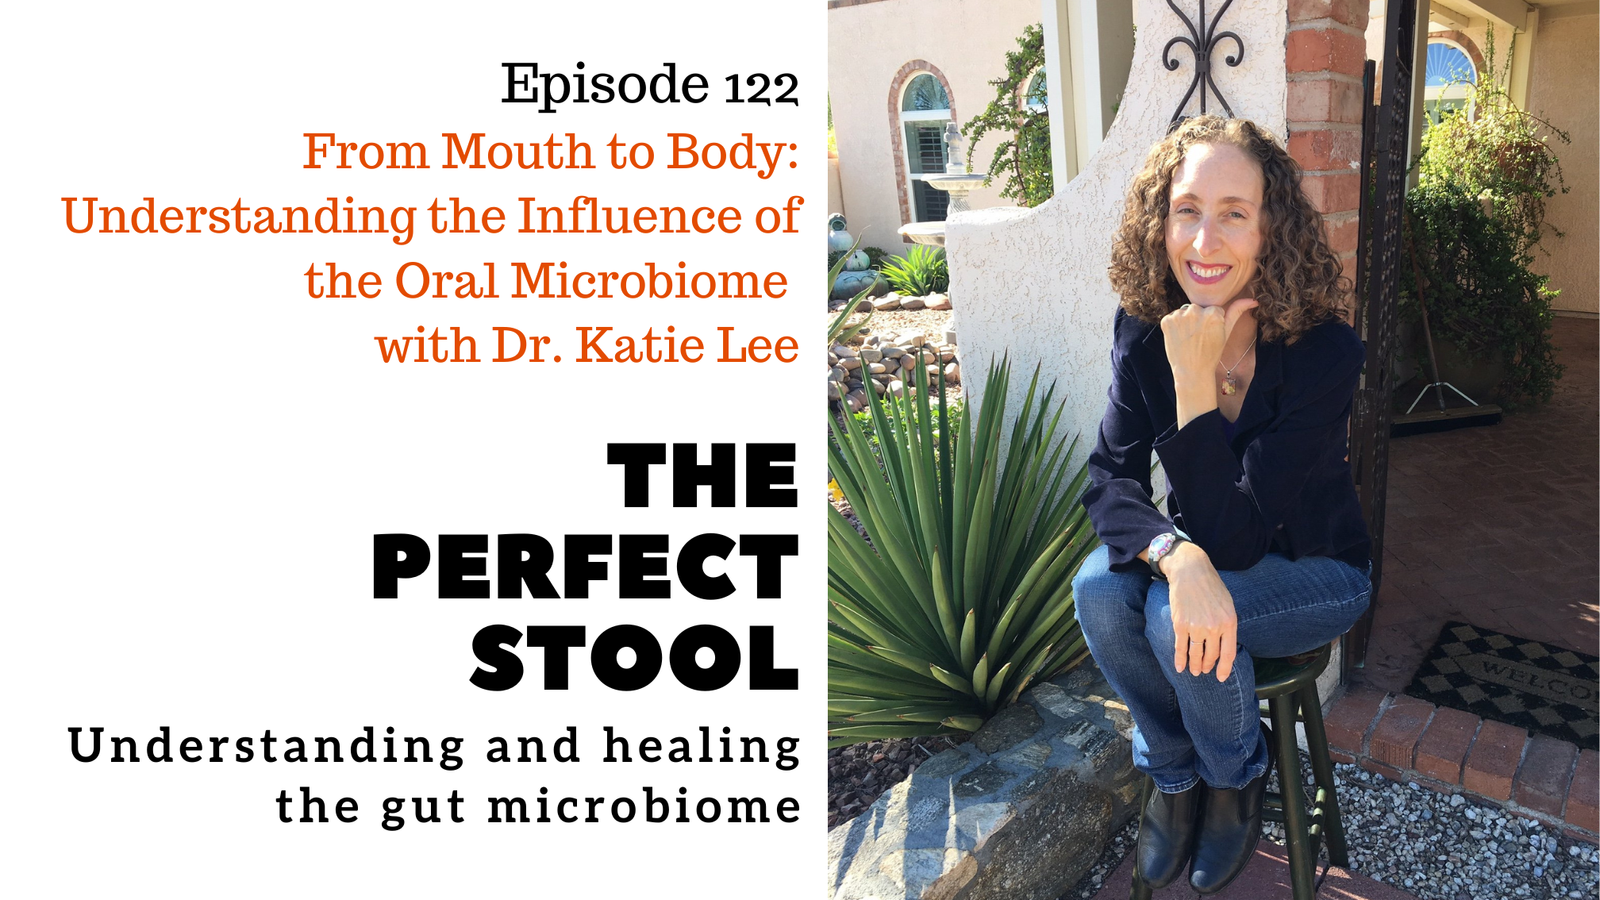 From Mouth to Body: Understanding the Influence of the Oral Microbiome with Dr. Katie Lee